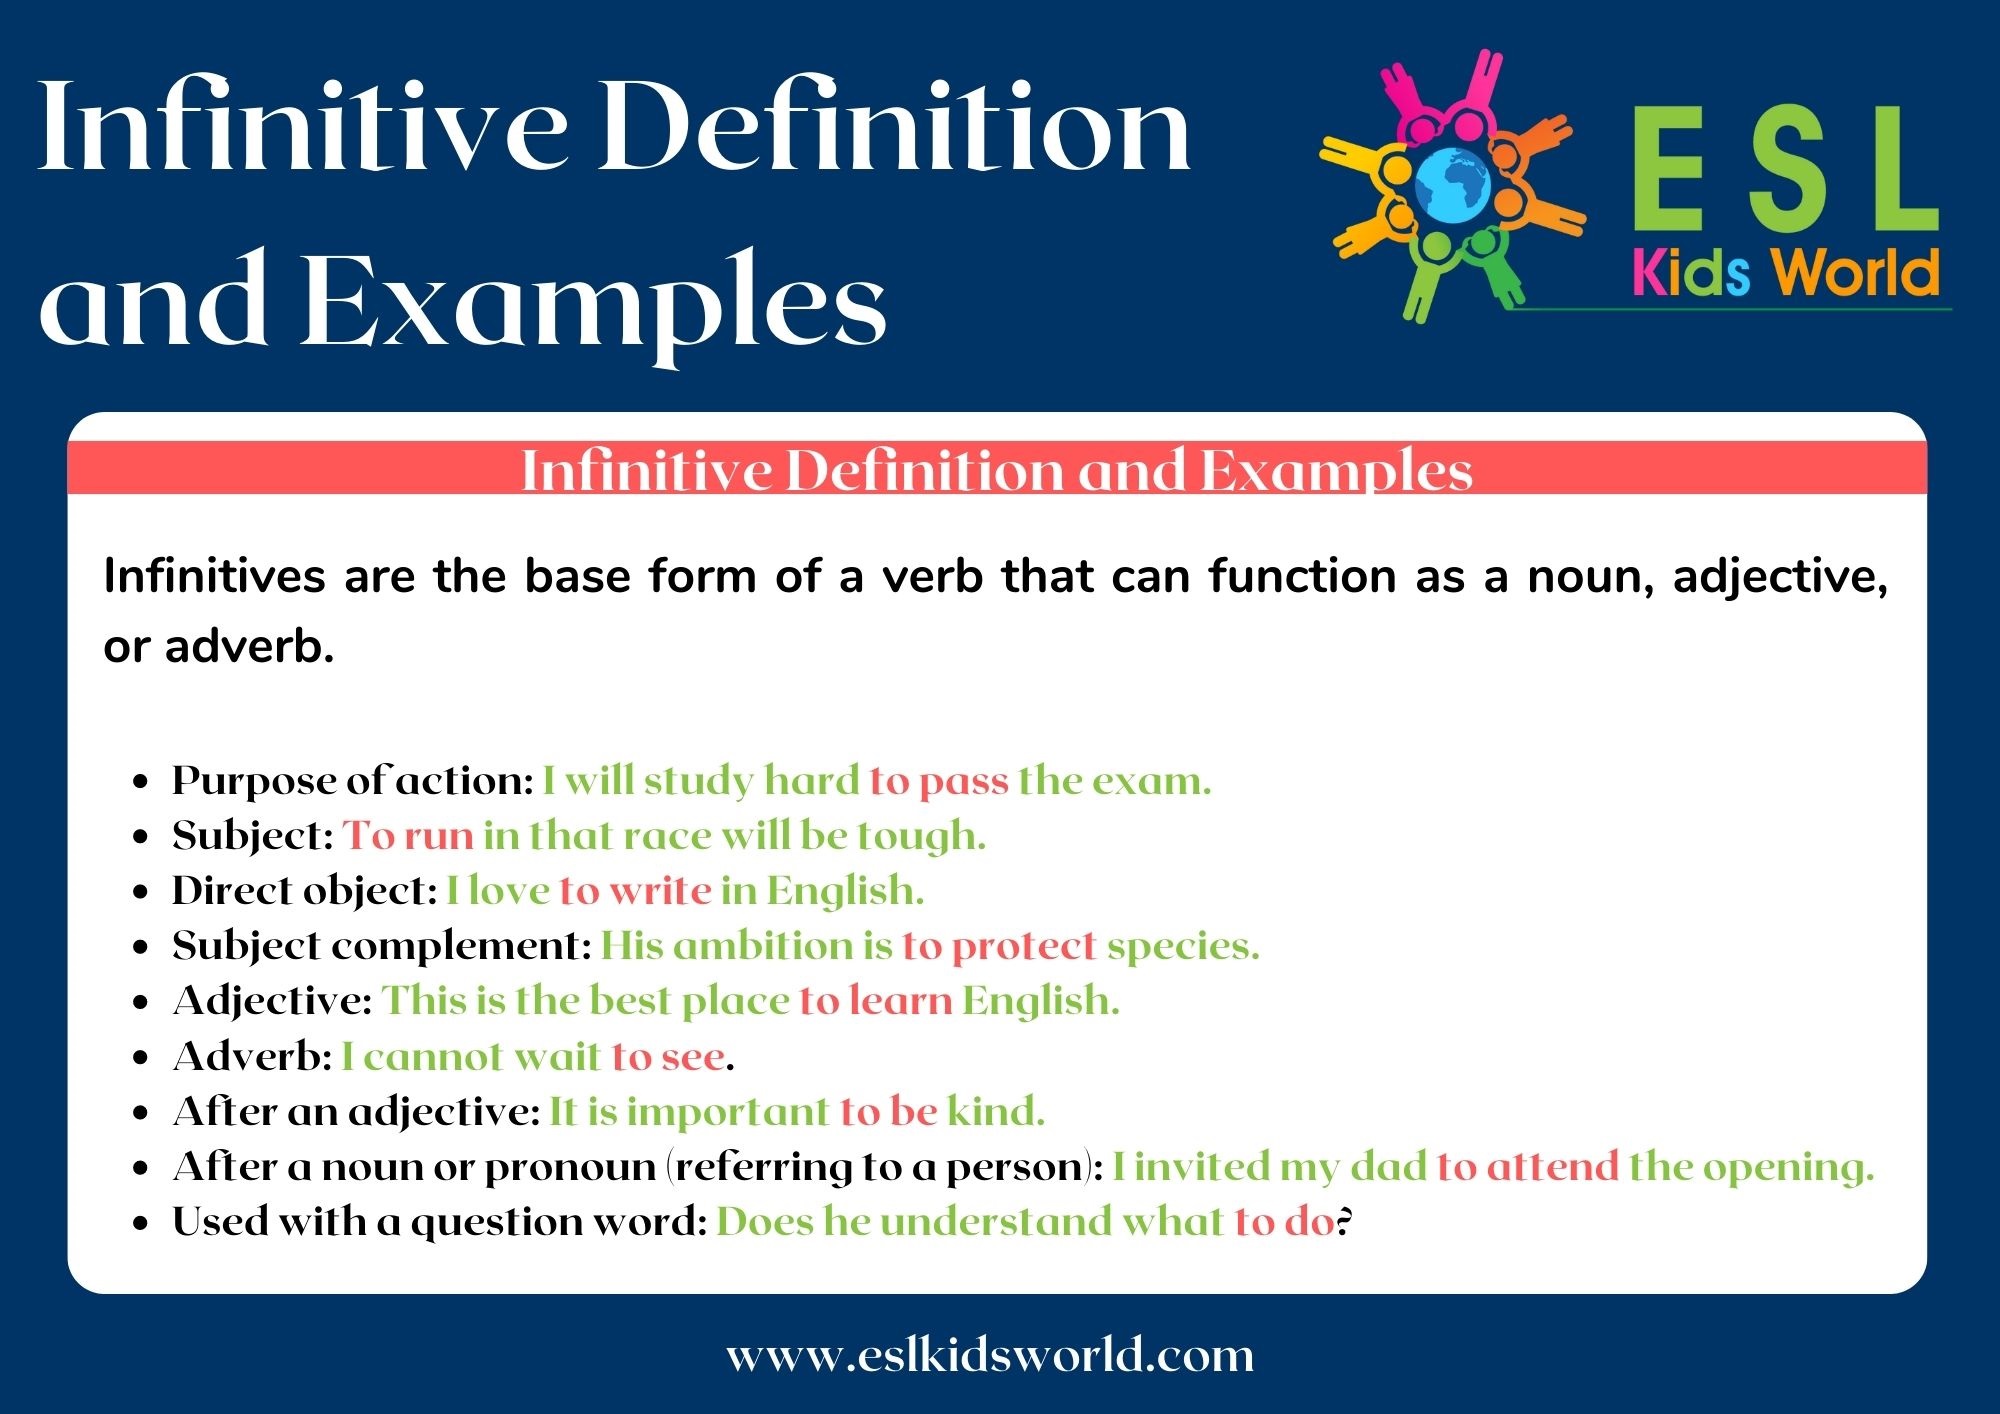 infinitives-what-are-infinitives-esl-kids-world